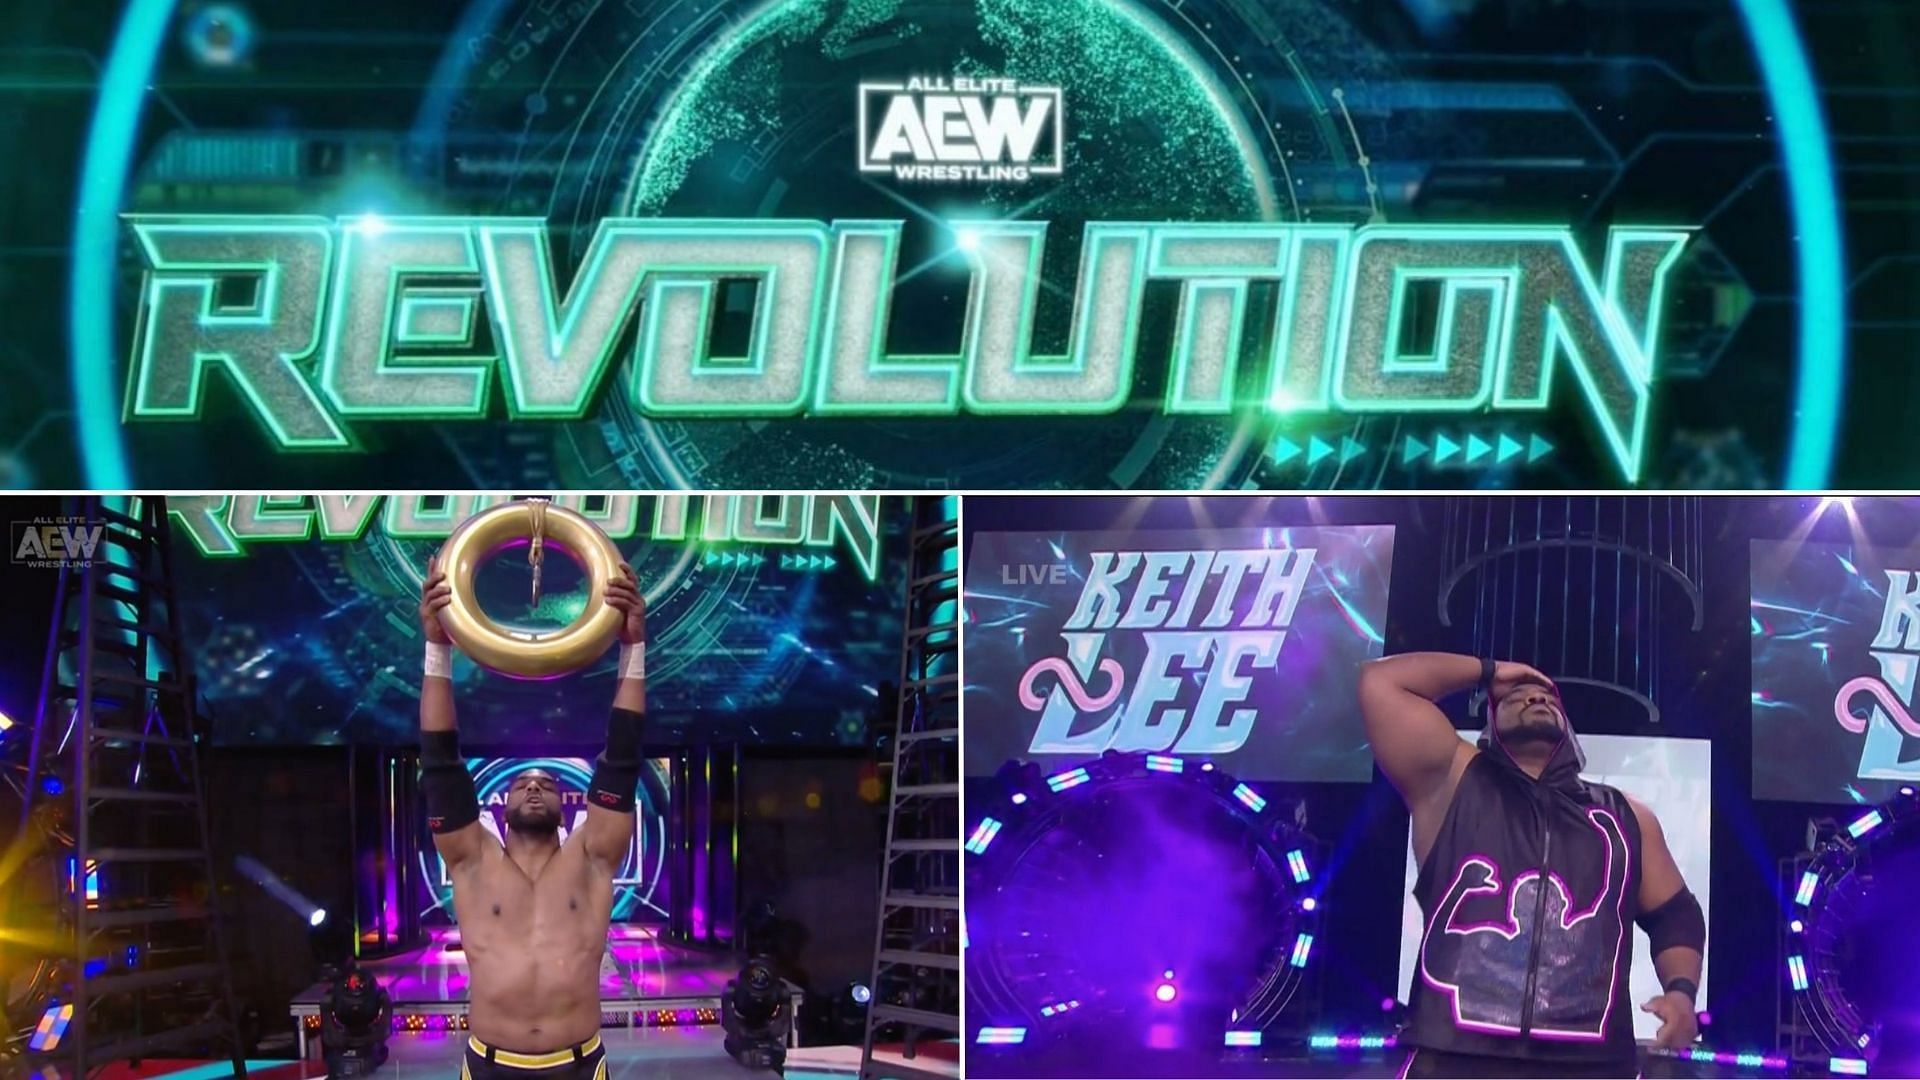 Keith Lee looks to join etch his name into Revolution history alongside Scorpio Sky